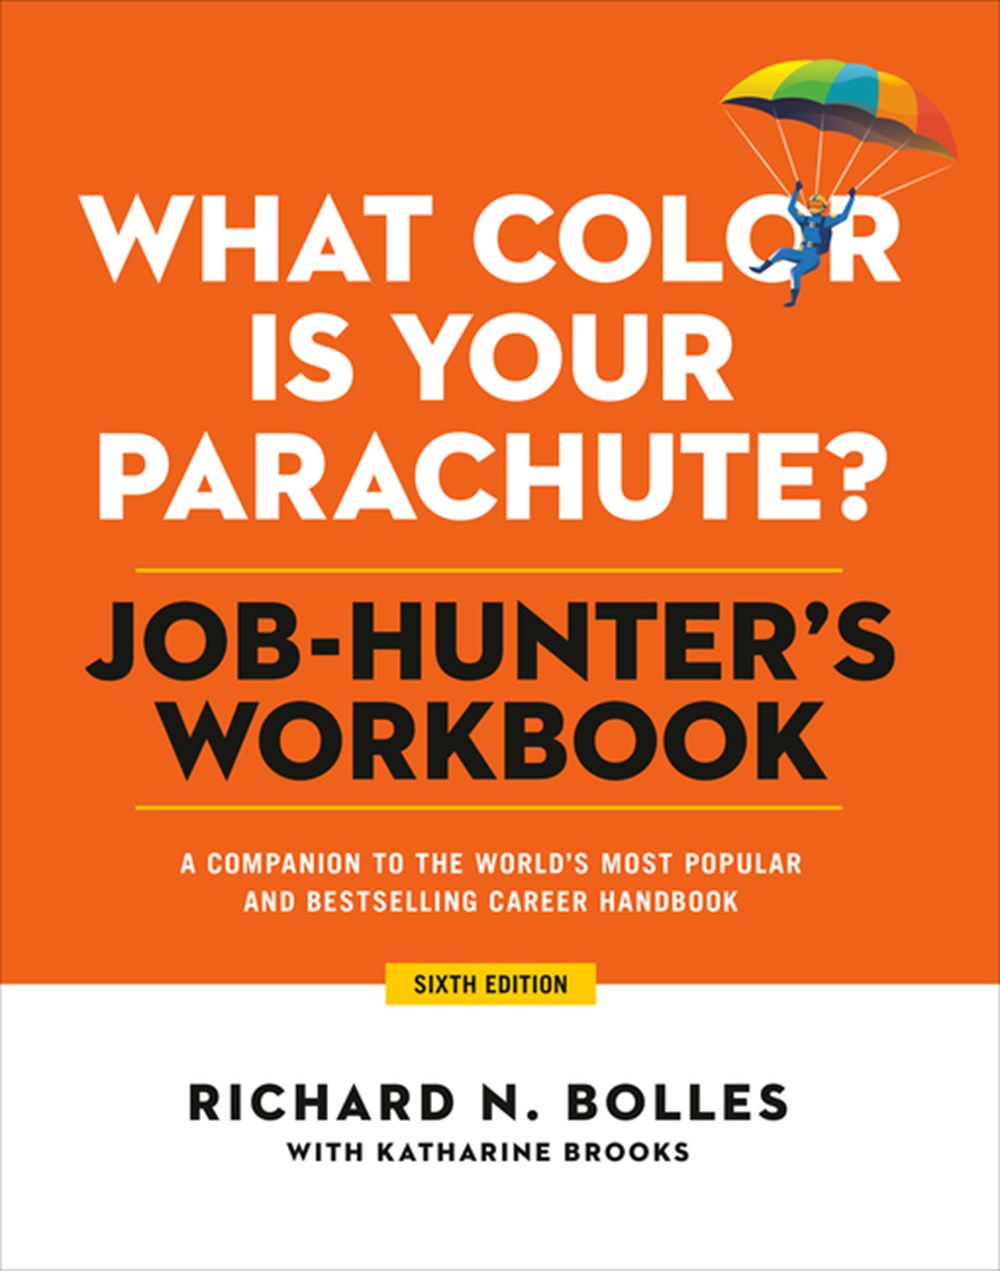 What Color Is Your Parachute? Job-Hunter's Workbook, Sixth Edition: A Companion to the World's Most 